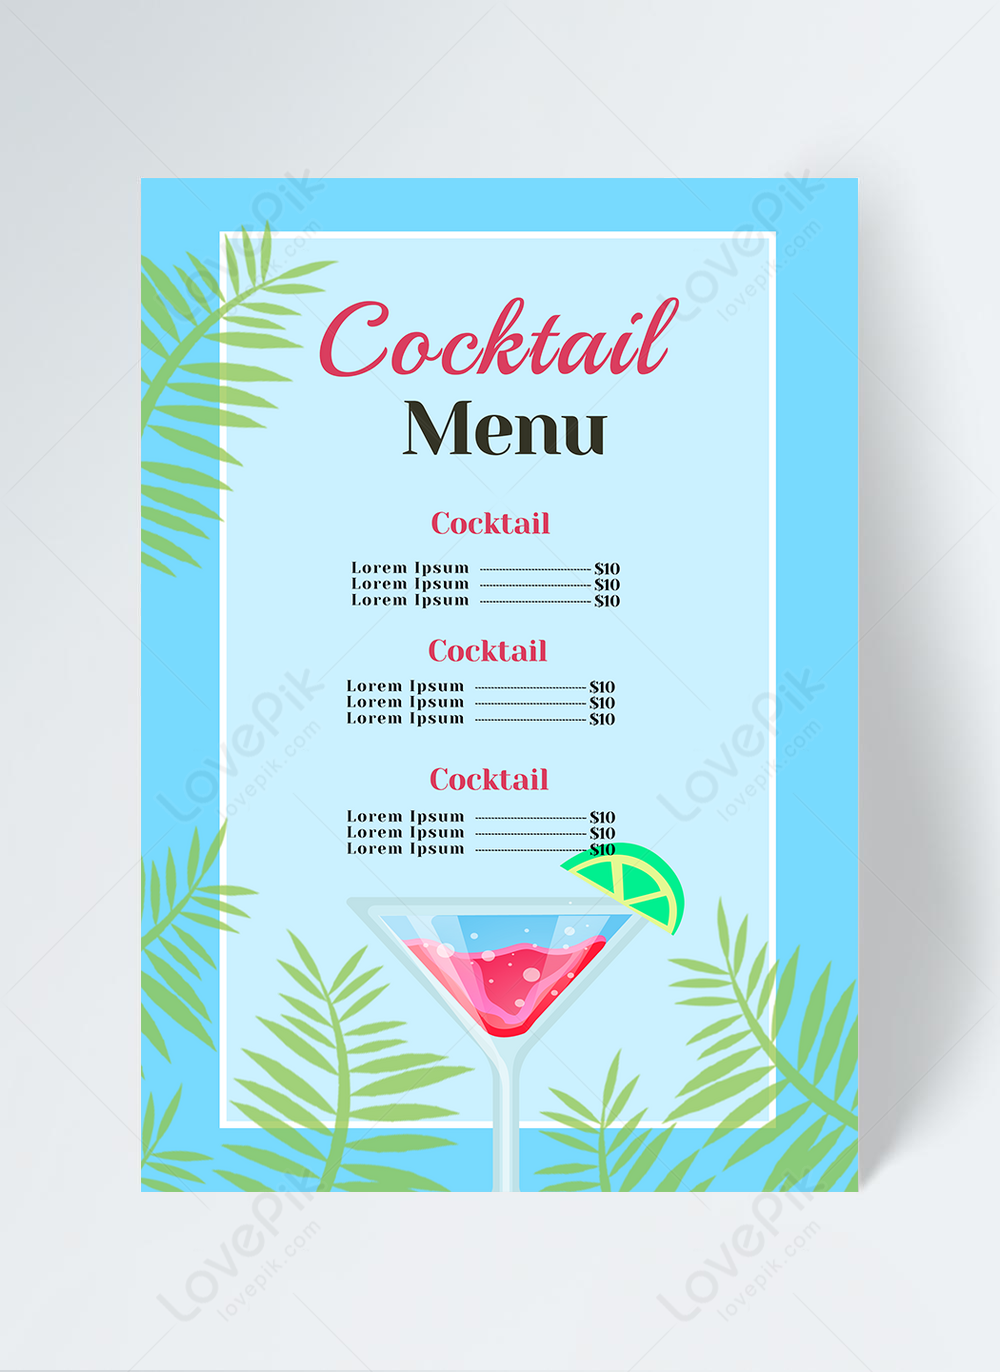 Blue vector cocktail menu design template image_picture free download ...